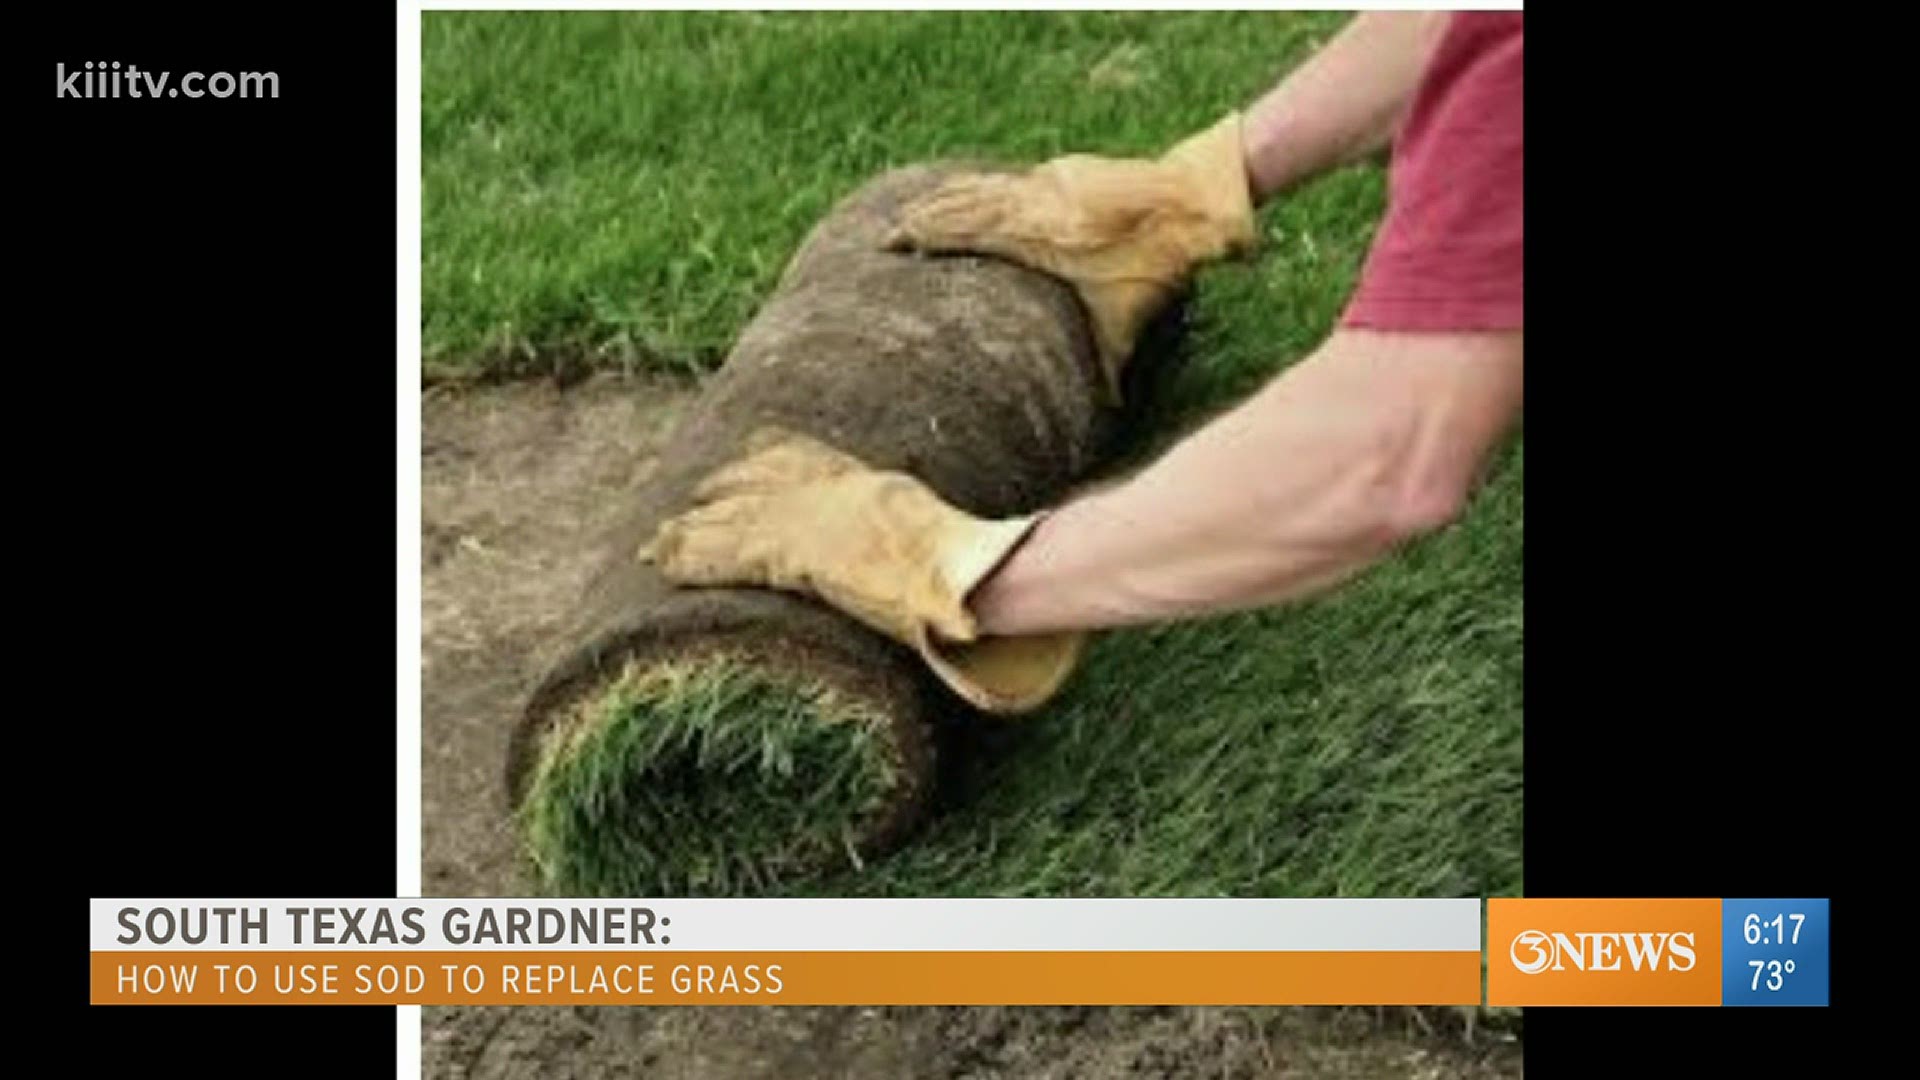 Many lost patches of grass or entire lawns during freeze